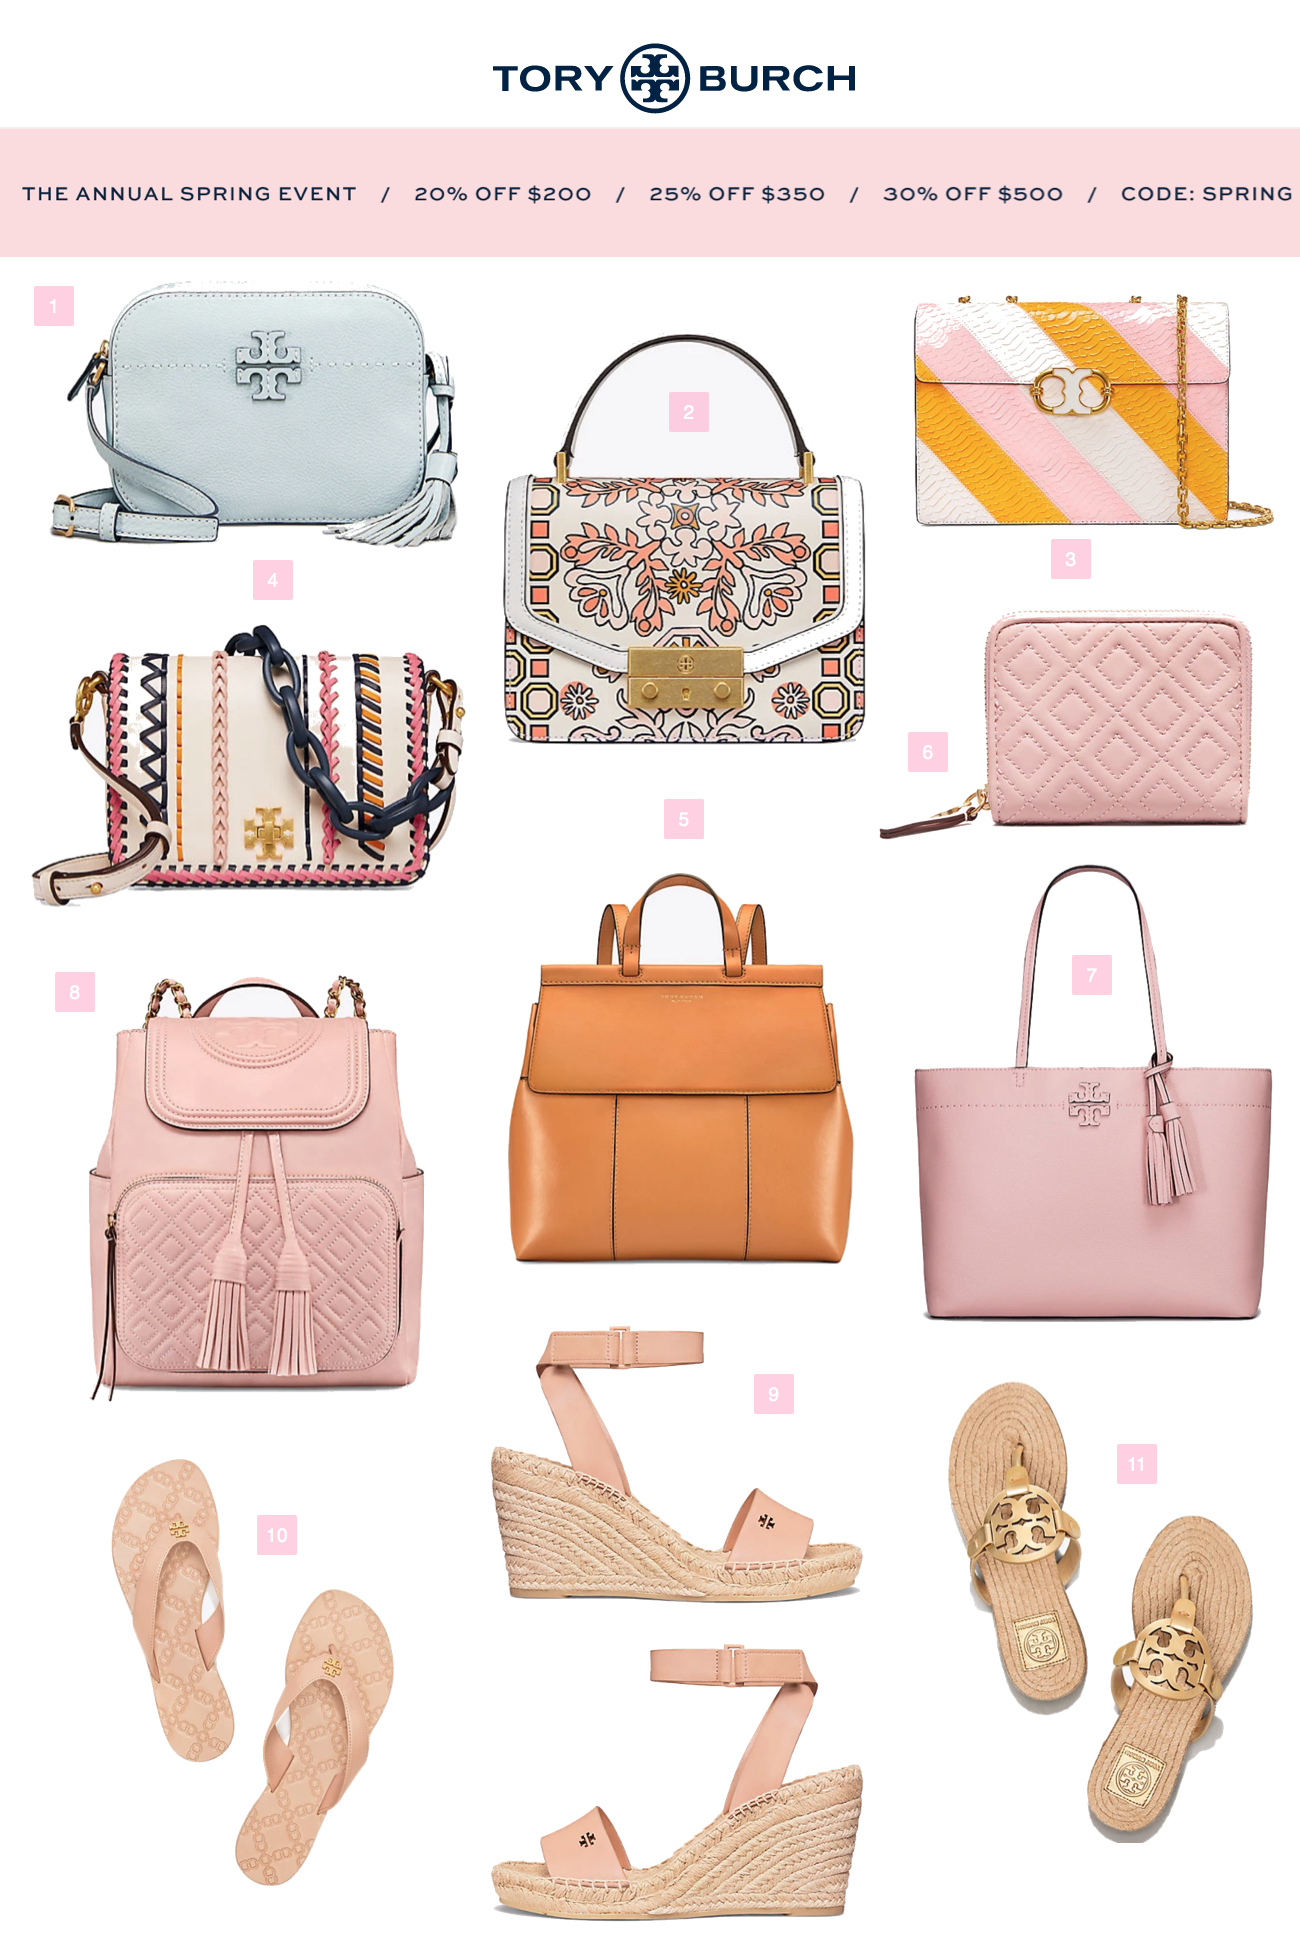 Tory Burch Spring Sale 20% to 30% off - SHOP DANDY | A florida based style  and beauty blog by Danielle